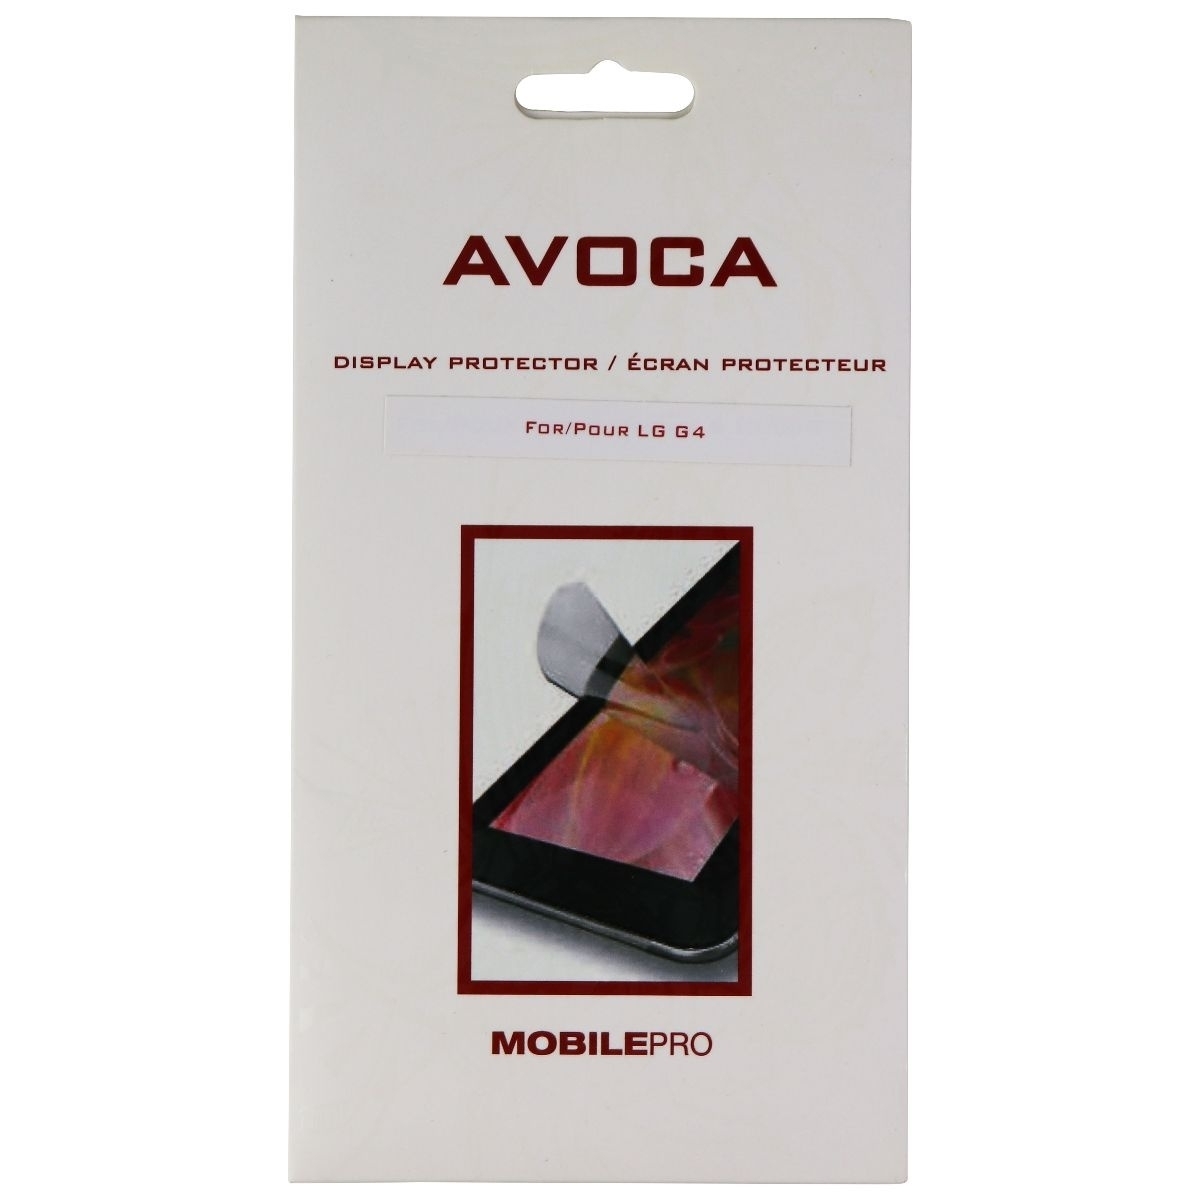 Avoca MobilePro Display Protector For LG G4 (2015) Smartphone - Clear